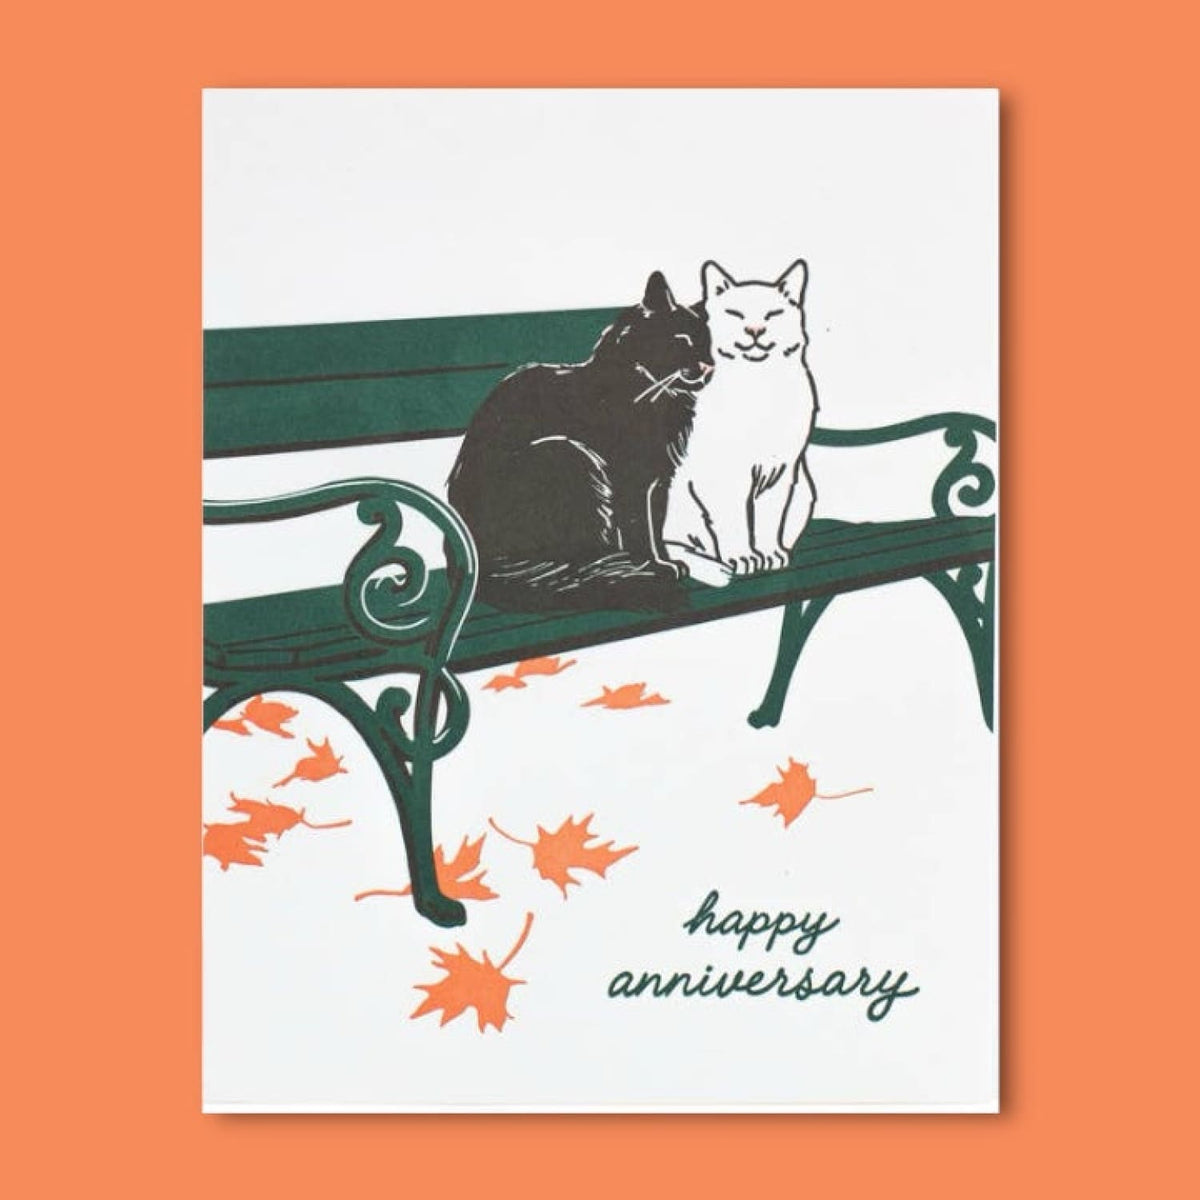 Cats On a Bench Anniversary Greeting Card Fake Food